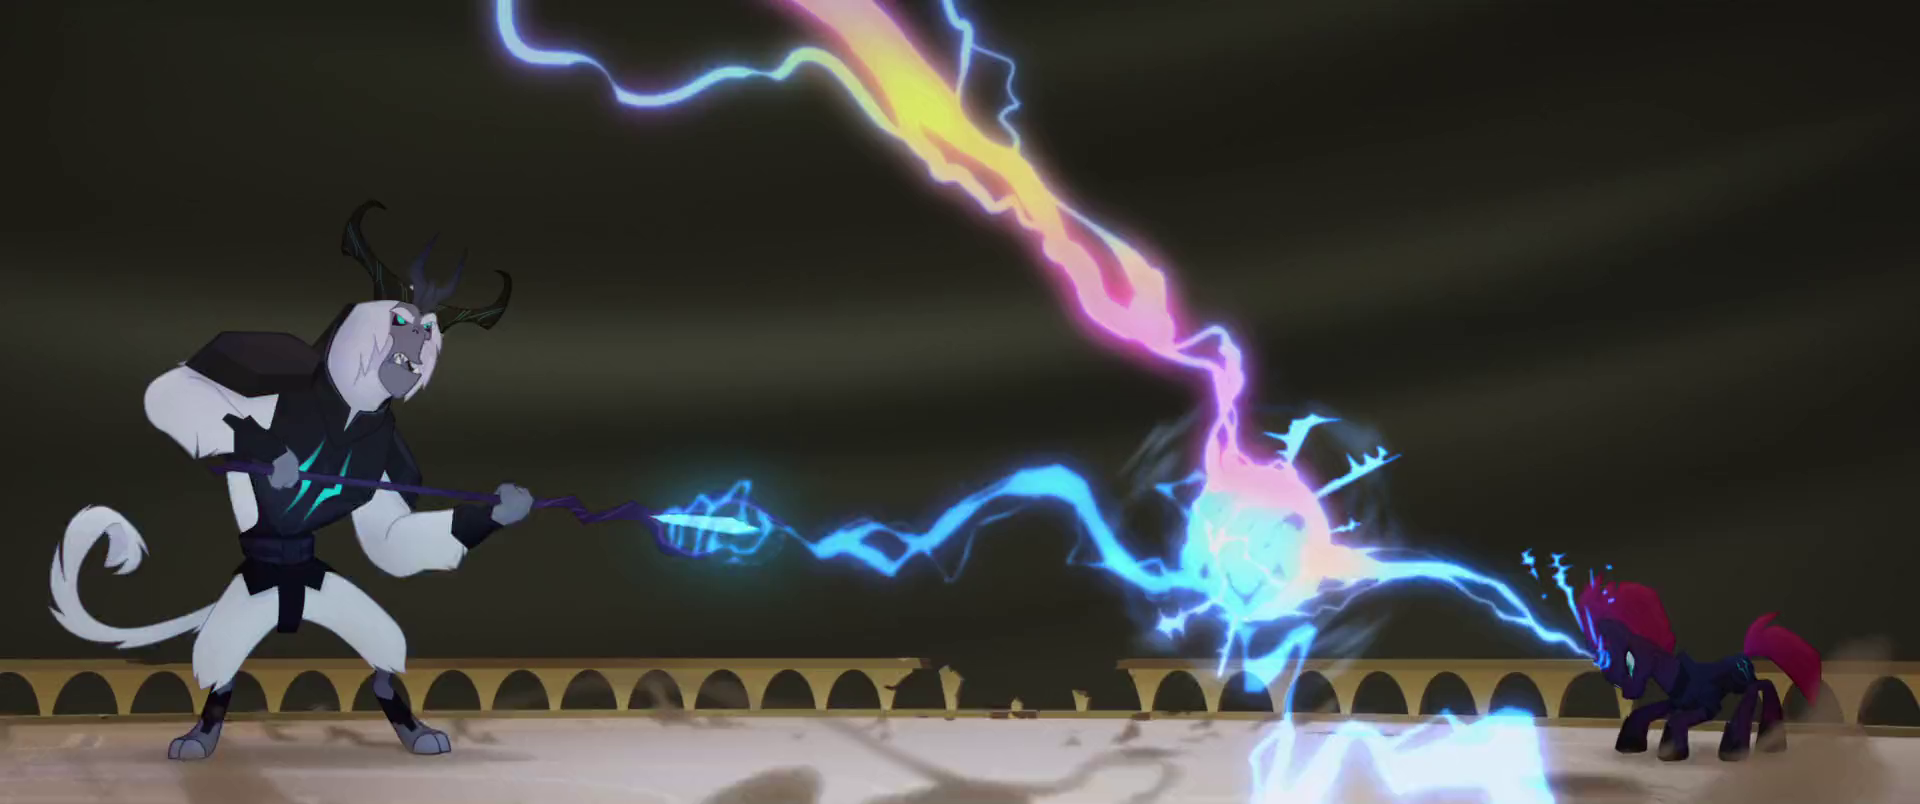 Image - Tempest Shadow vs. the Storm King MLPTM.png | My ...